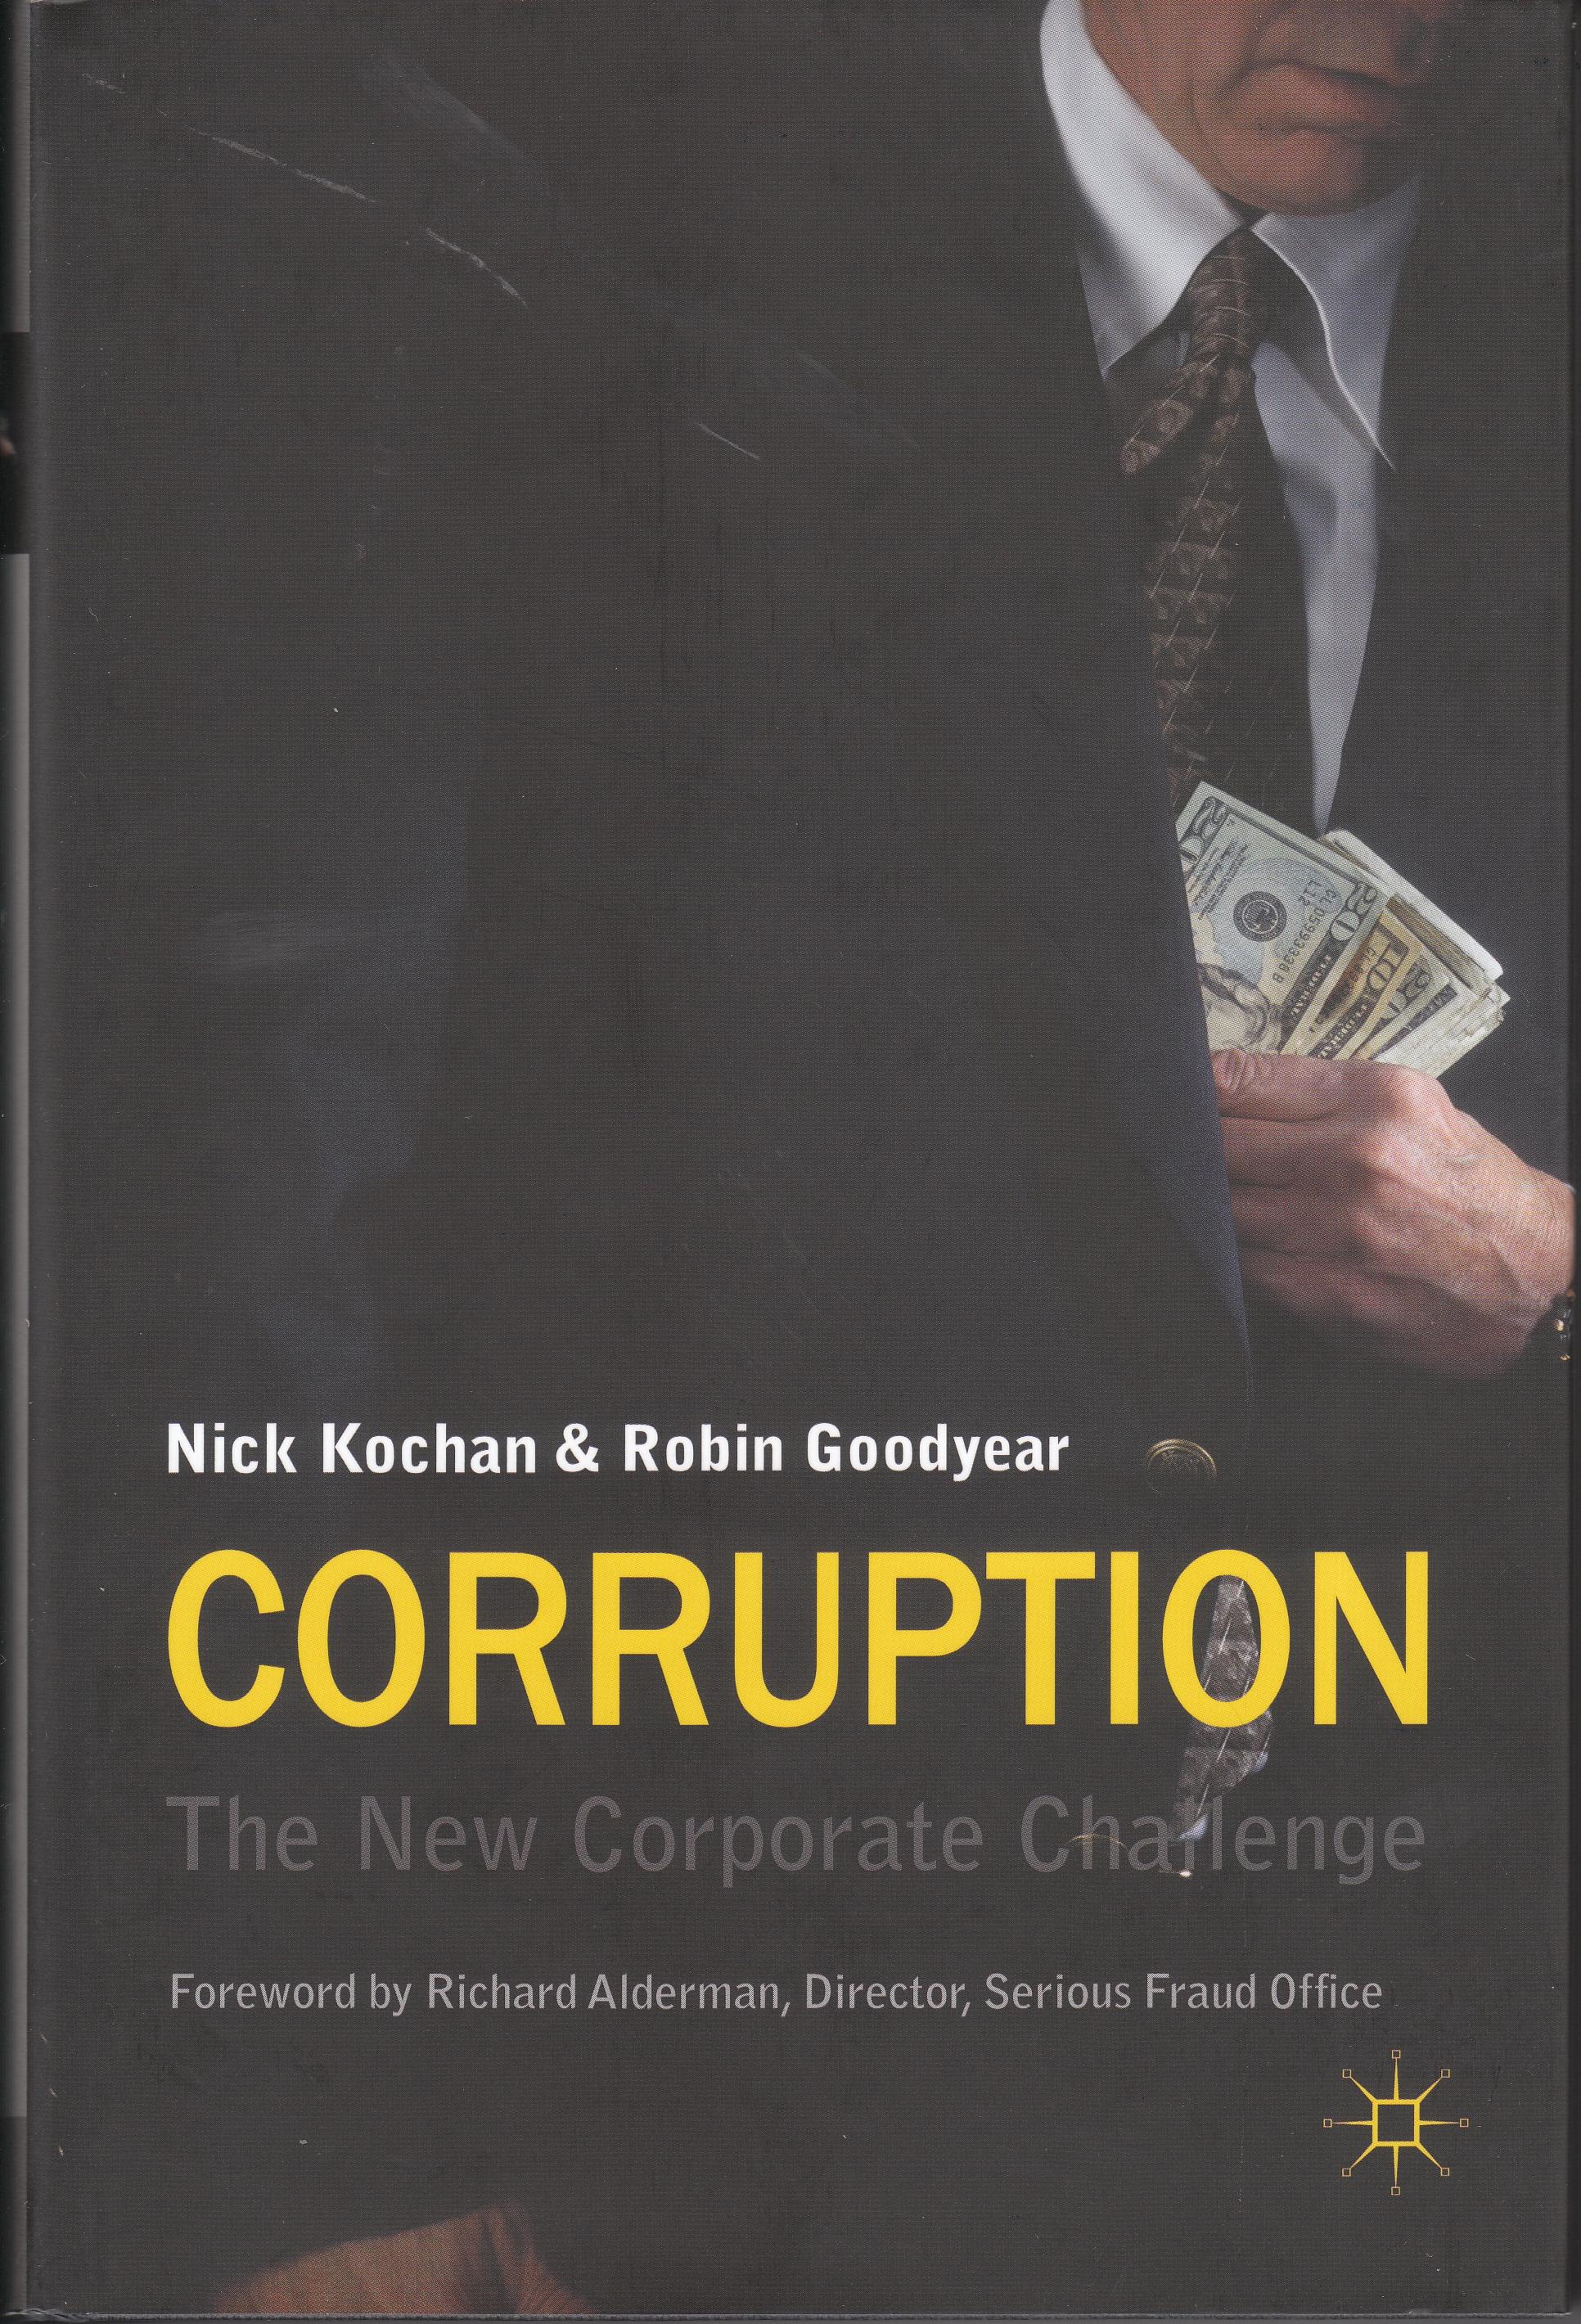 Corruption. The New Corporate Challenge.